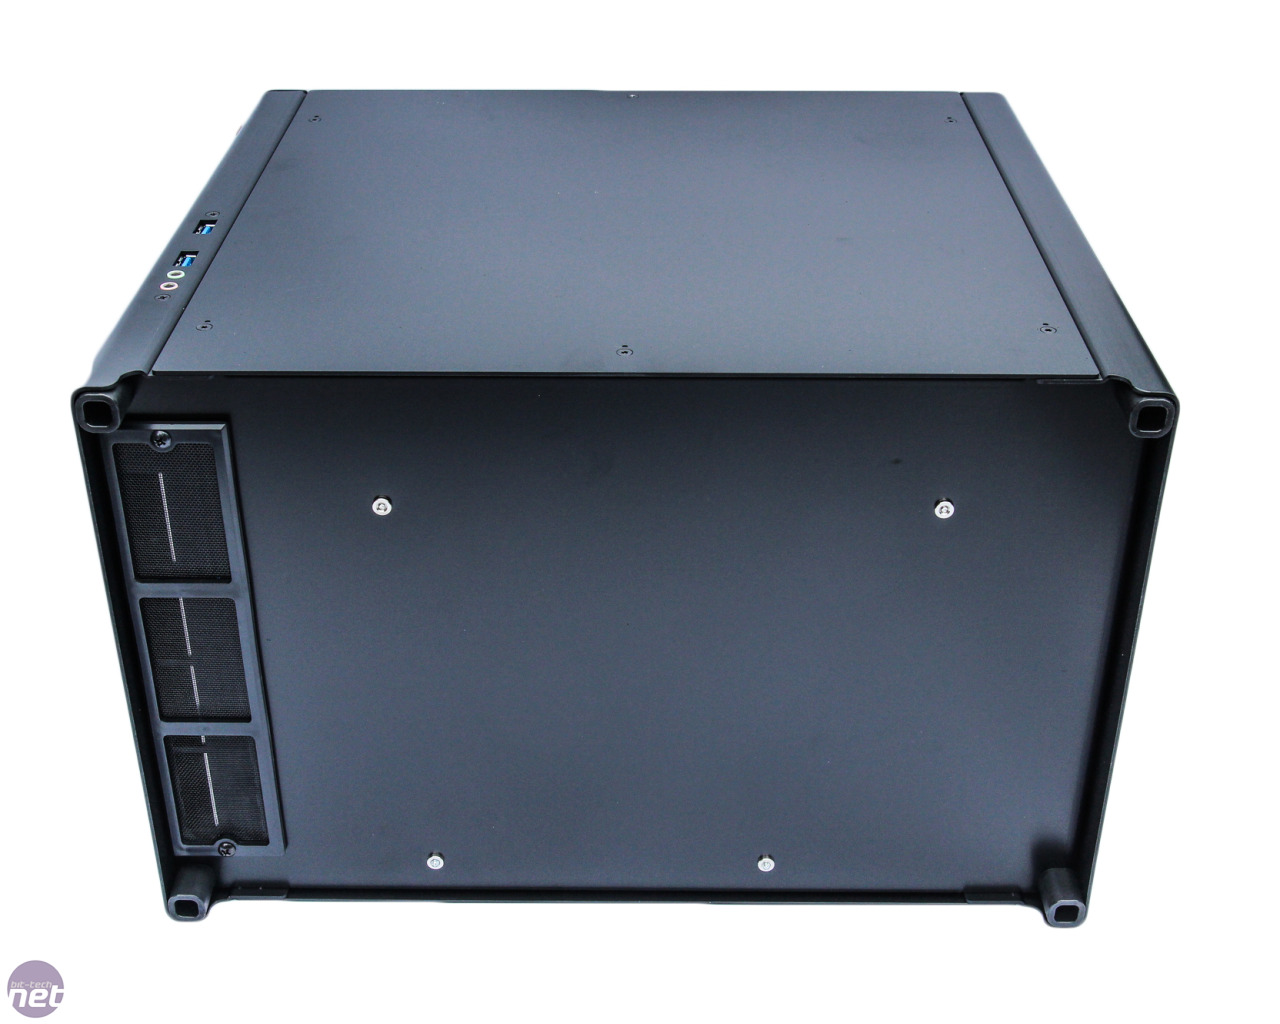 The all-aluminium construction sees the Lian Li PC-Q28 weigh in at just 3.2...